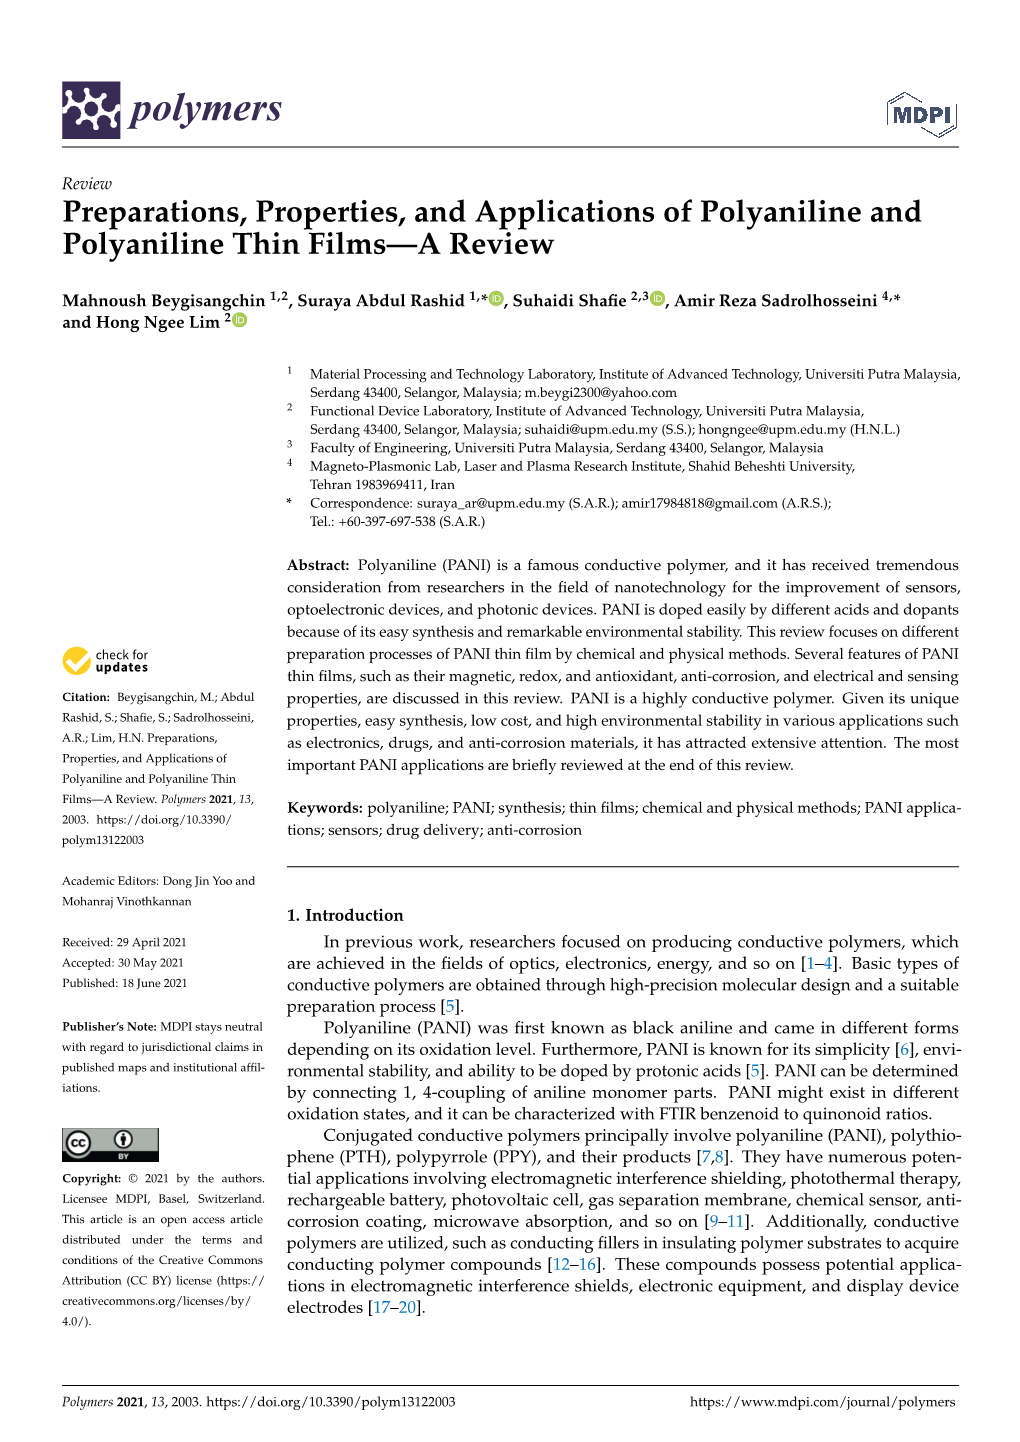 Preparations, Properties, and Applications of Polyaniline and Polyaniline Thin Films—A Review